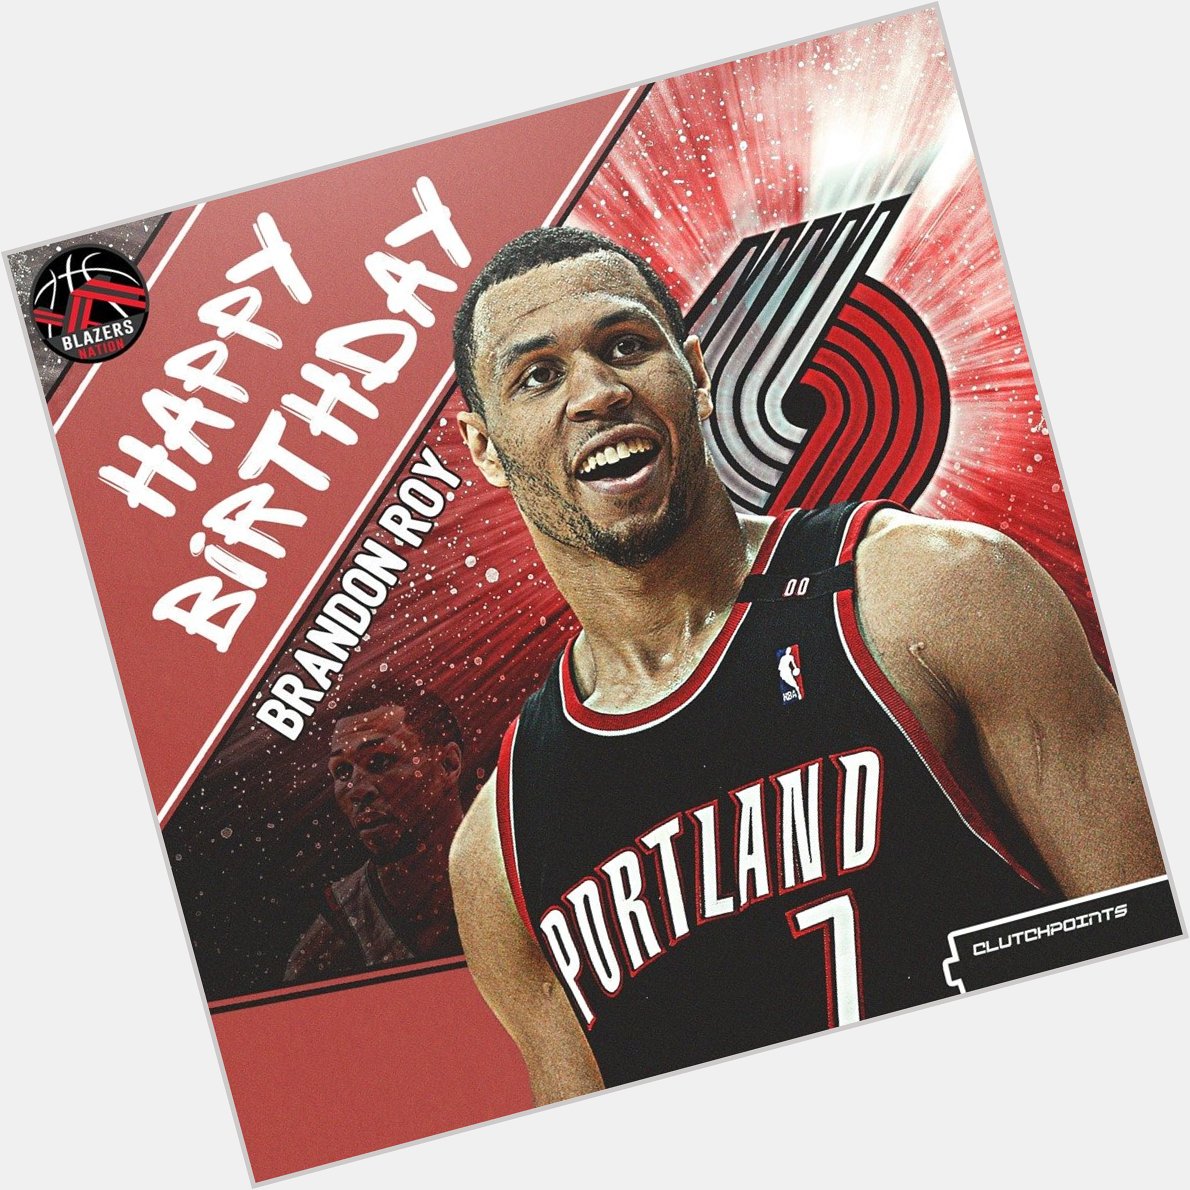 Join Blazers Nation in wishing former 3x All-Star, Brandon Roy, a happy 35th birthday!    